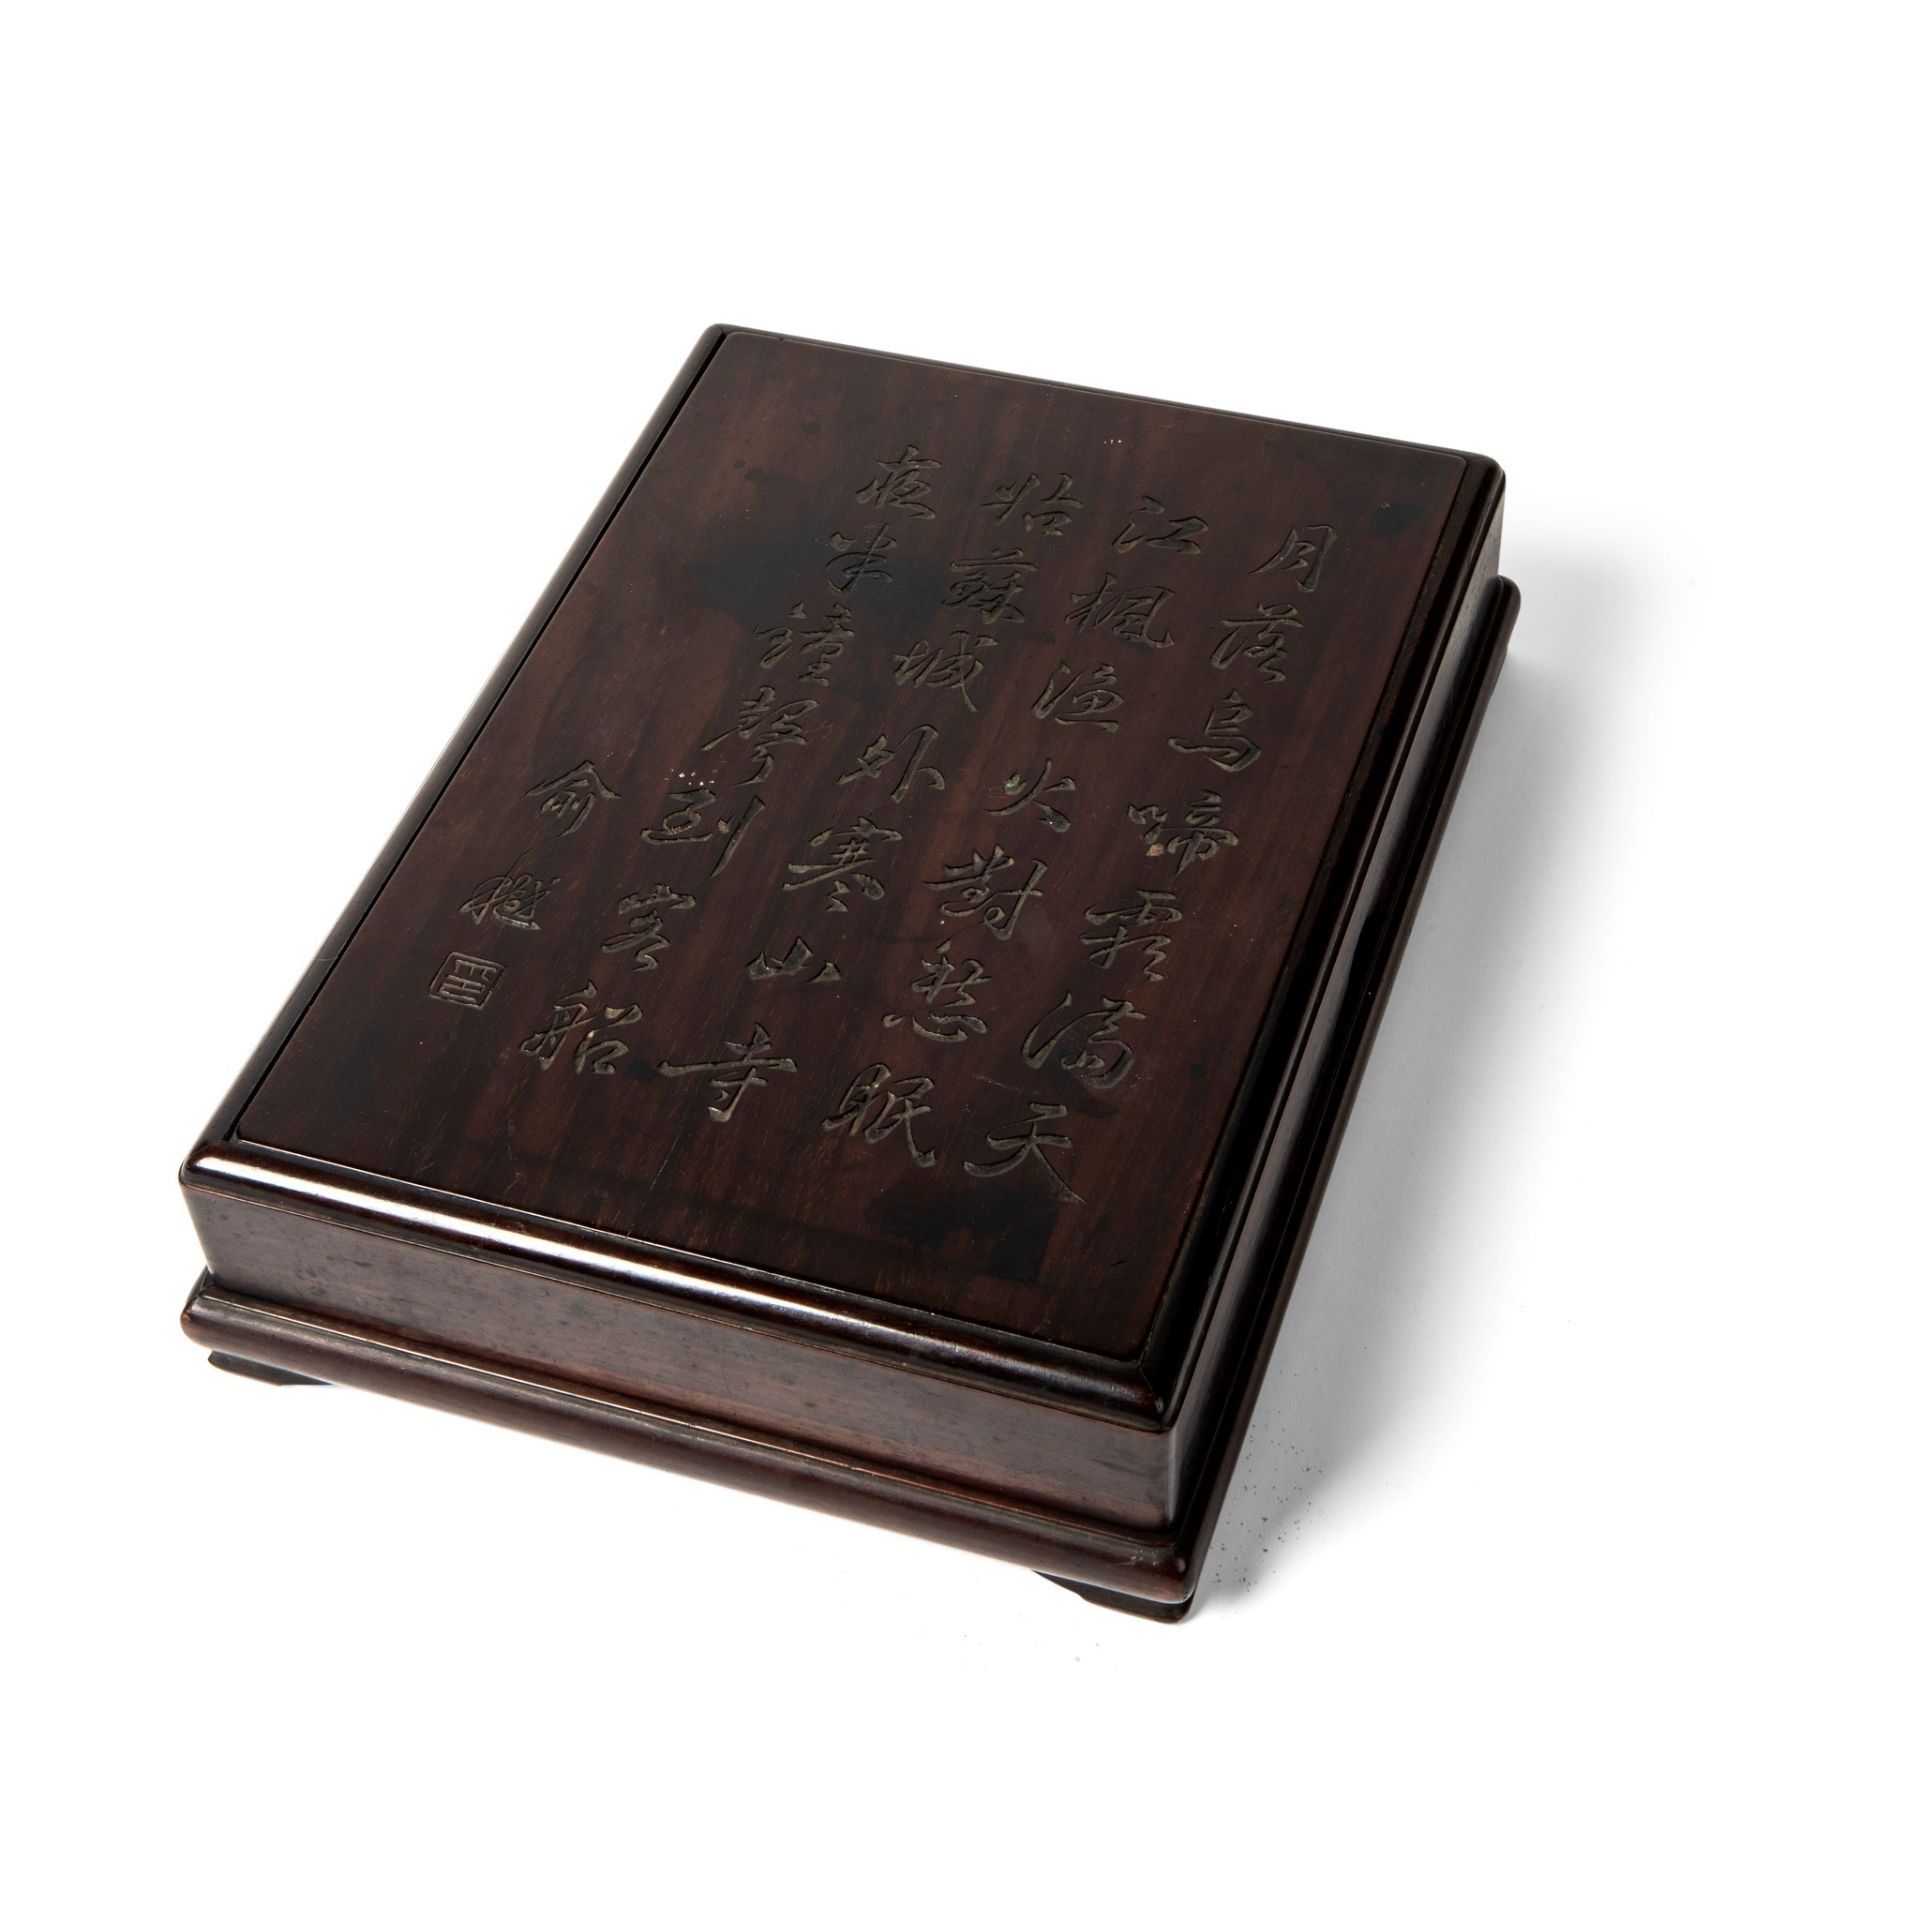 Y SUANZHIMU RECTANGULAR BOX WITH COVER QING DYNASTY, 19TH CENTURY - Image 3 of 3